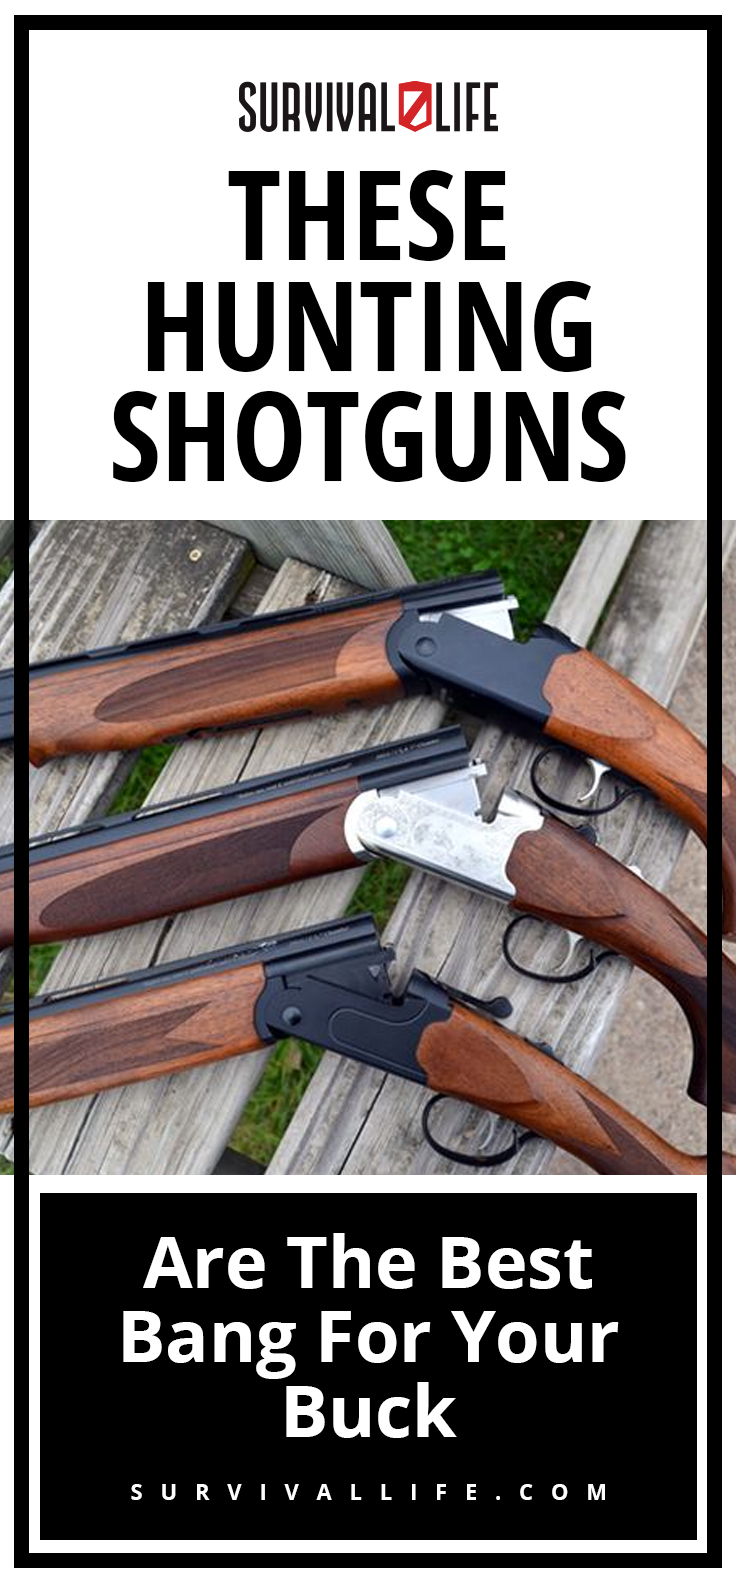 These Hunting Shotguns Are The Best Bang For Your Buck | https://survivallife.com/hunting-shotguns/